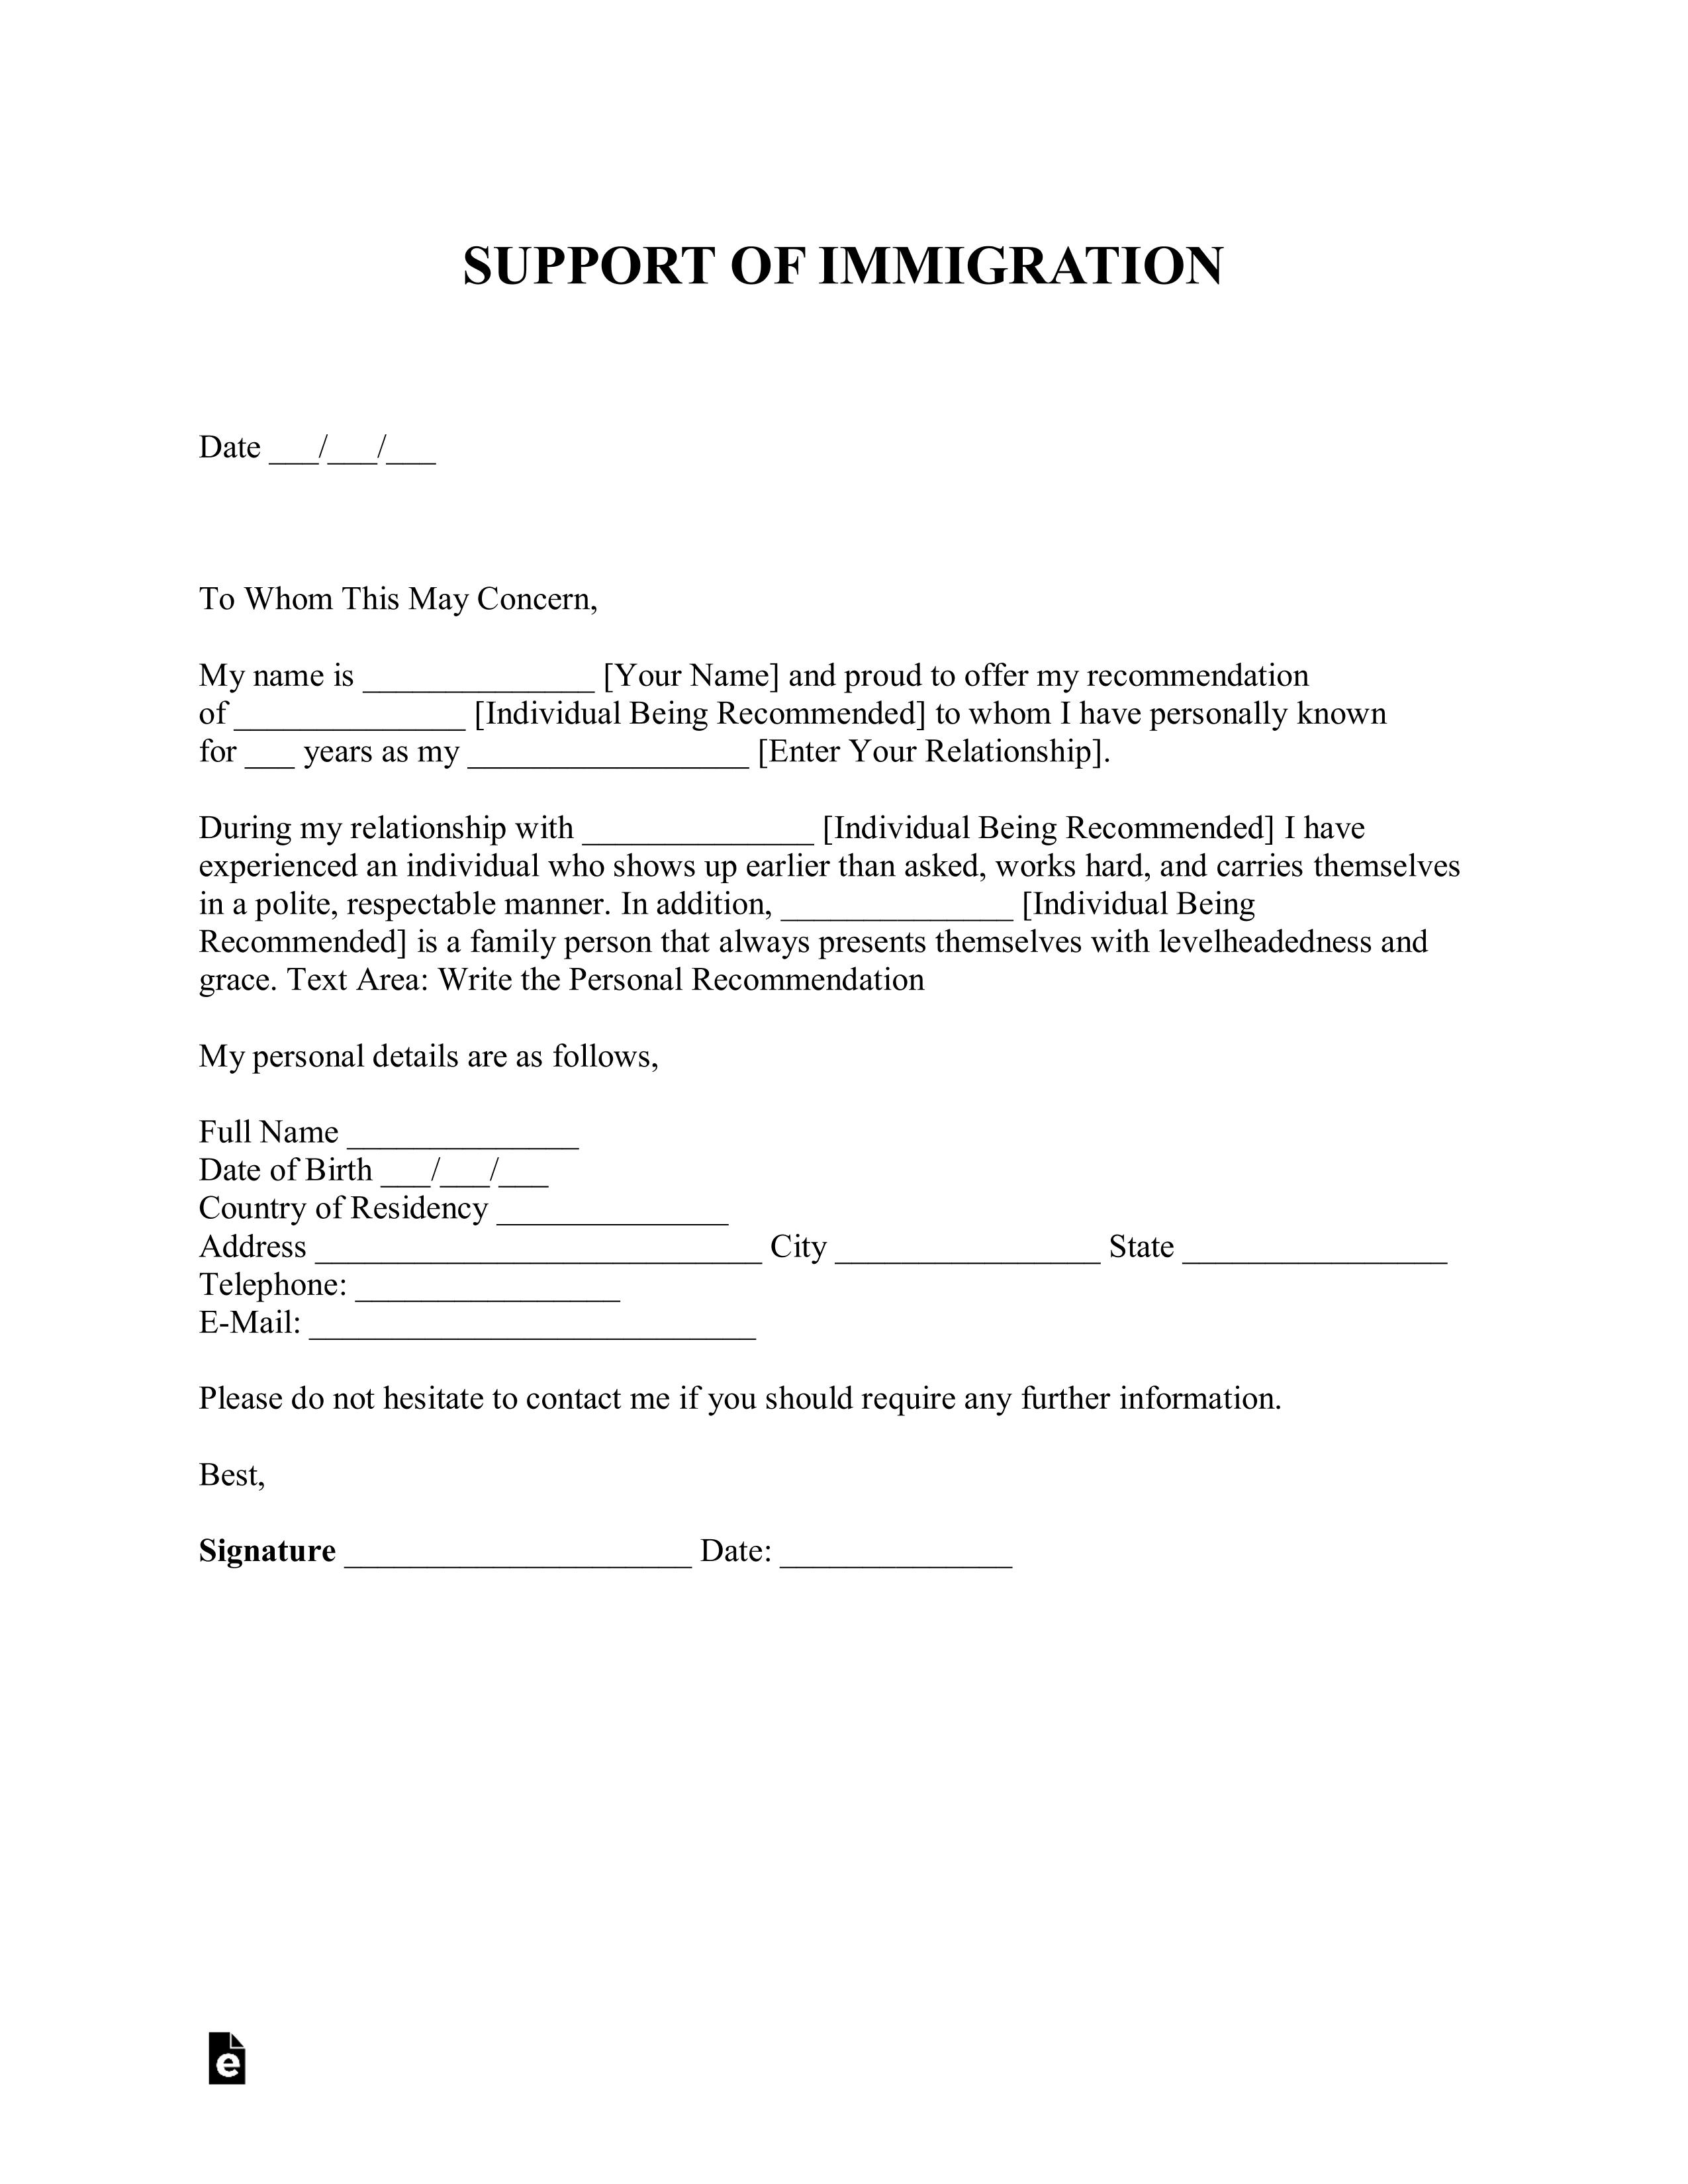 Letter of Recommendation for Immigration